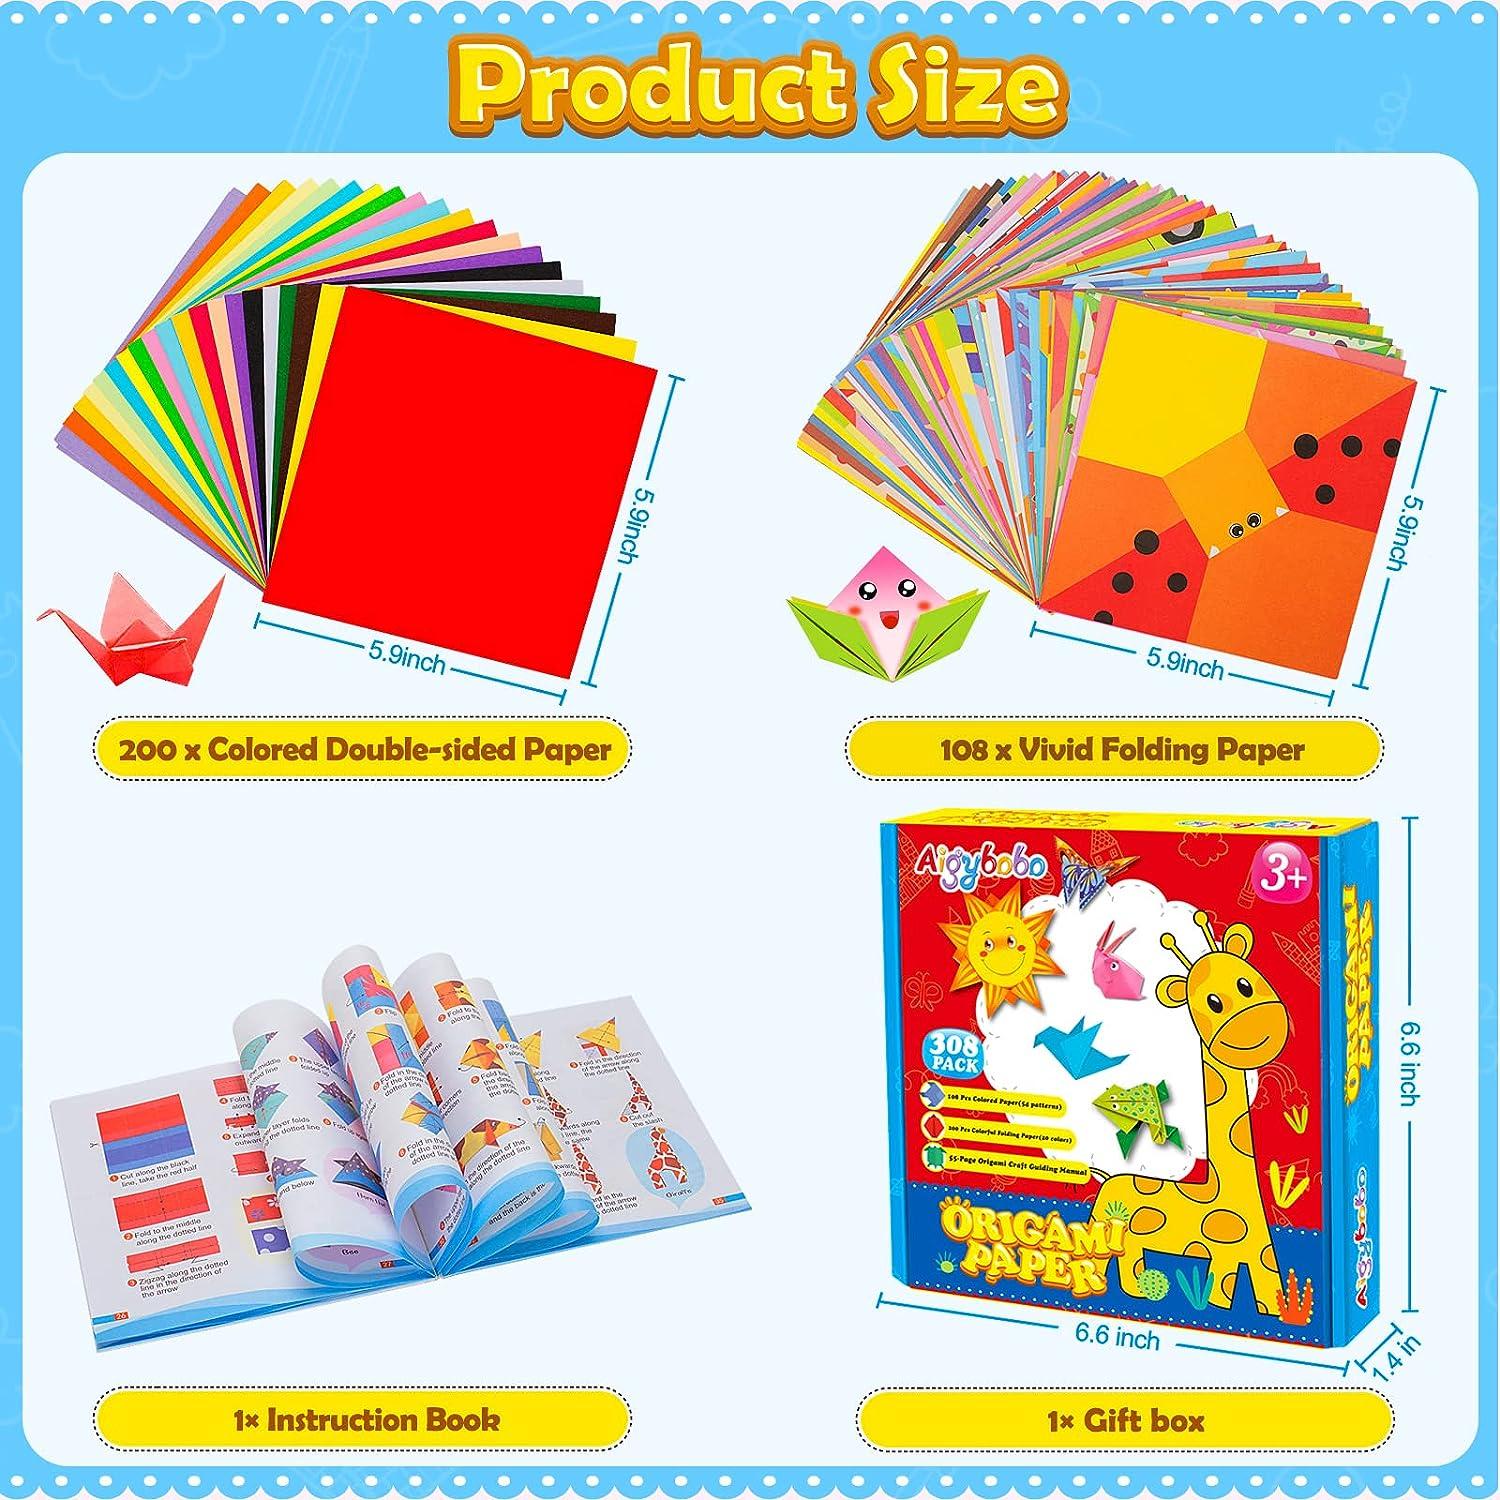  Paint Your Own Stepping Stones For Kids Craft Kit: 5 Pack Arts  and Crafts For Kids Ages 4-8, Art Supplies for Boys Girls Gifts for 3 4 5 6  7 8